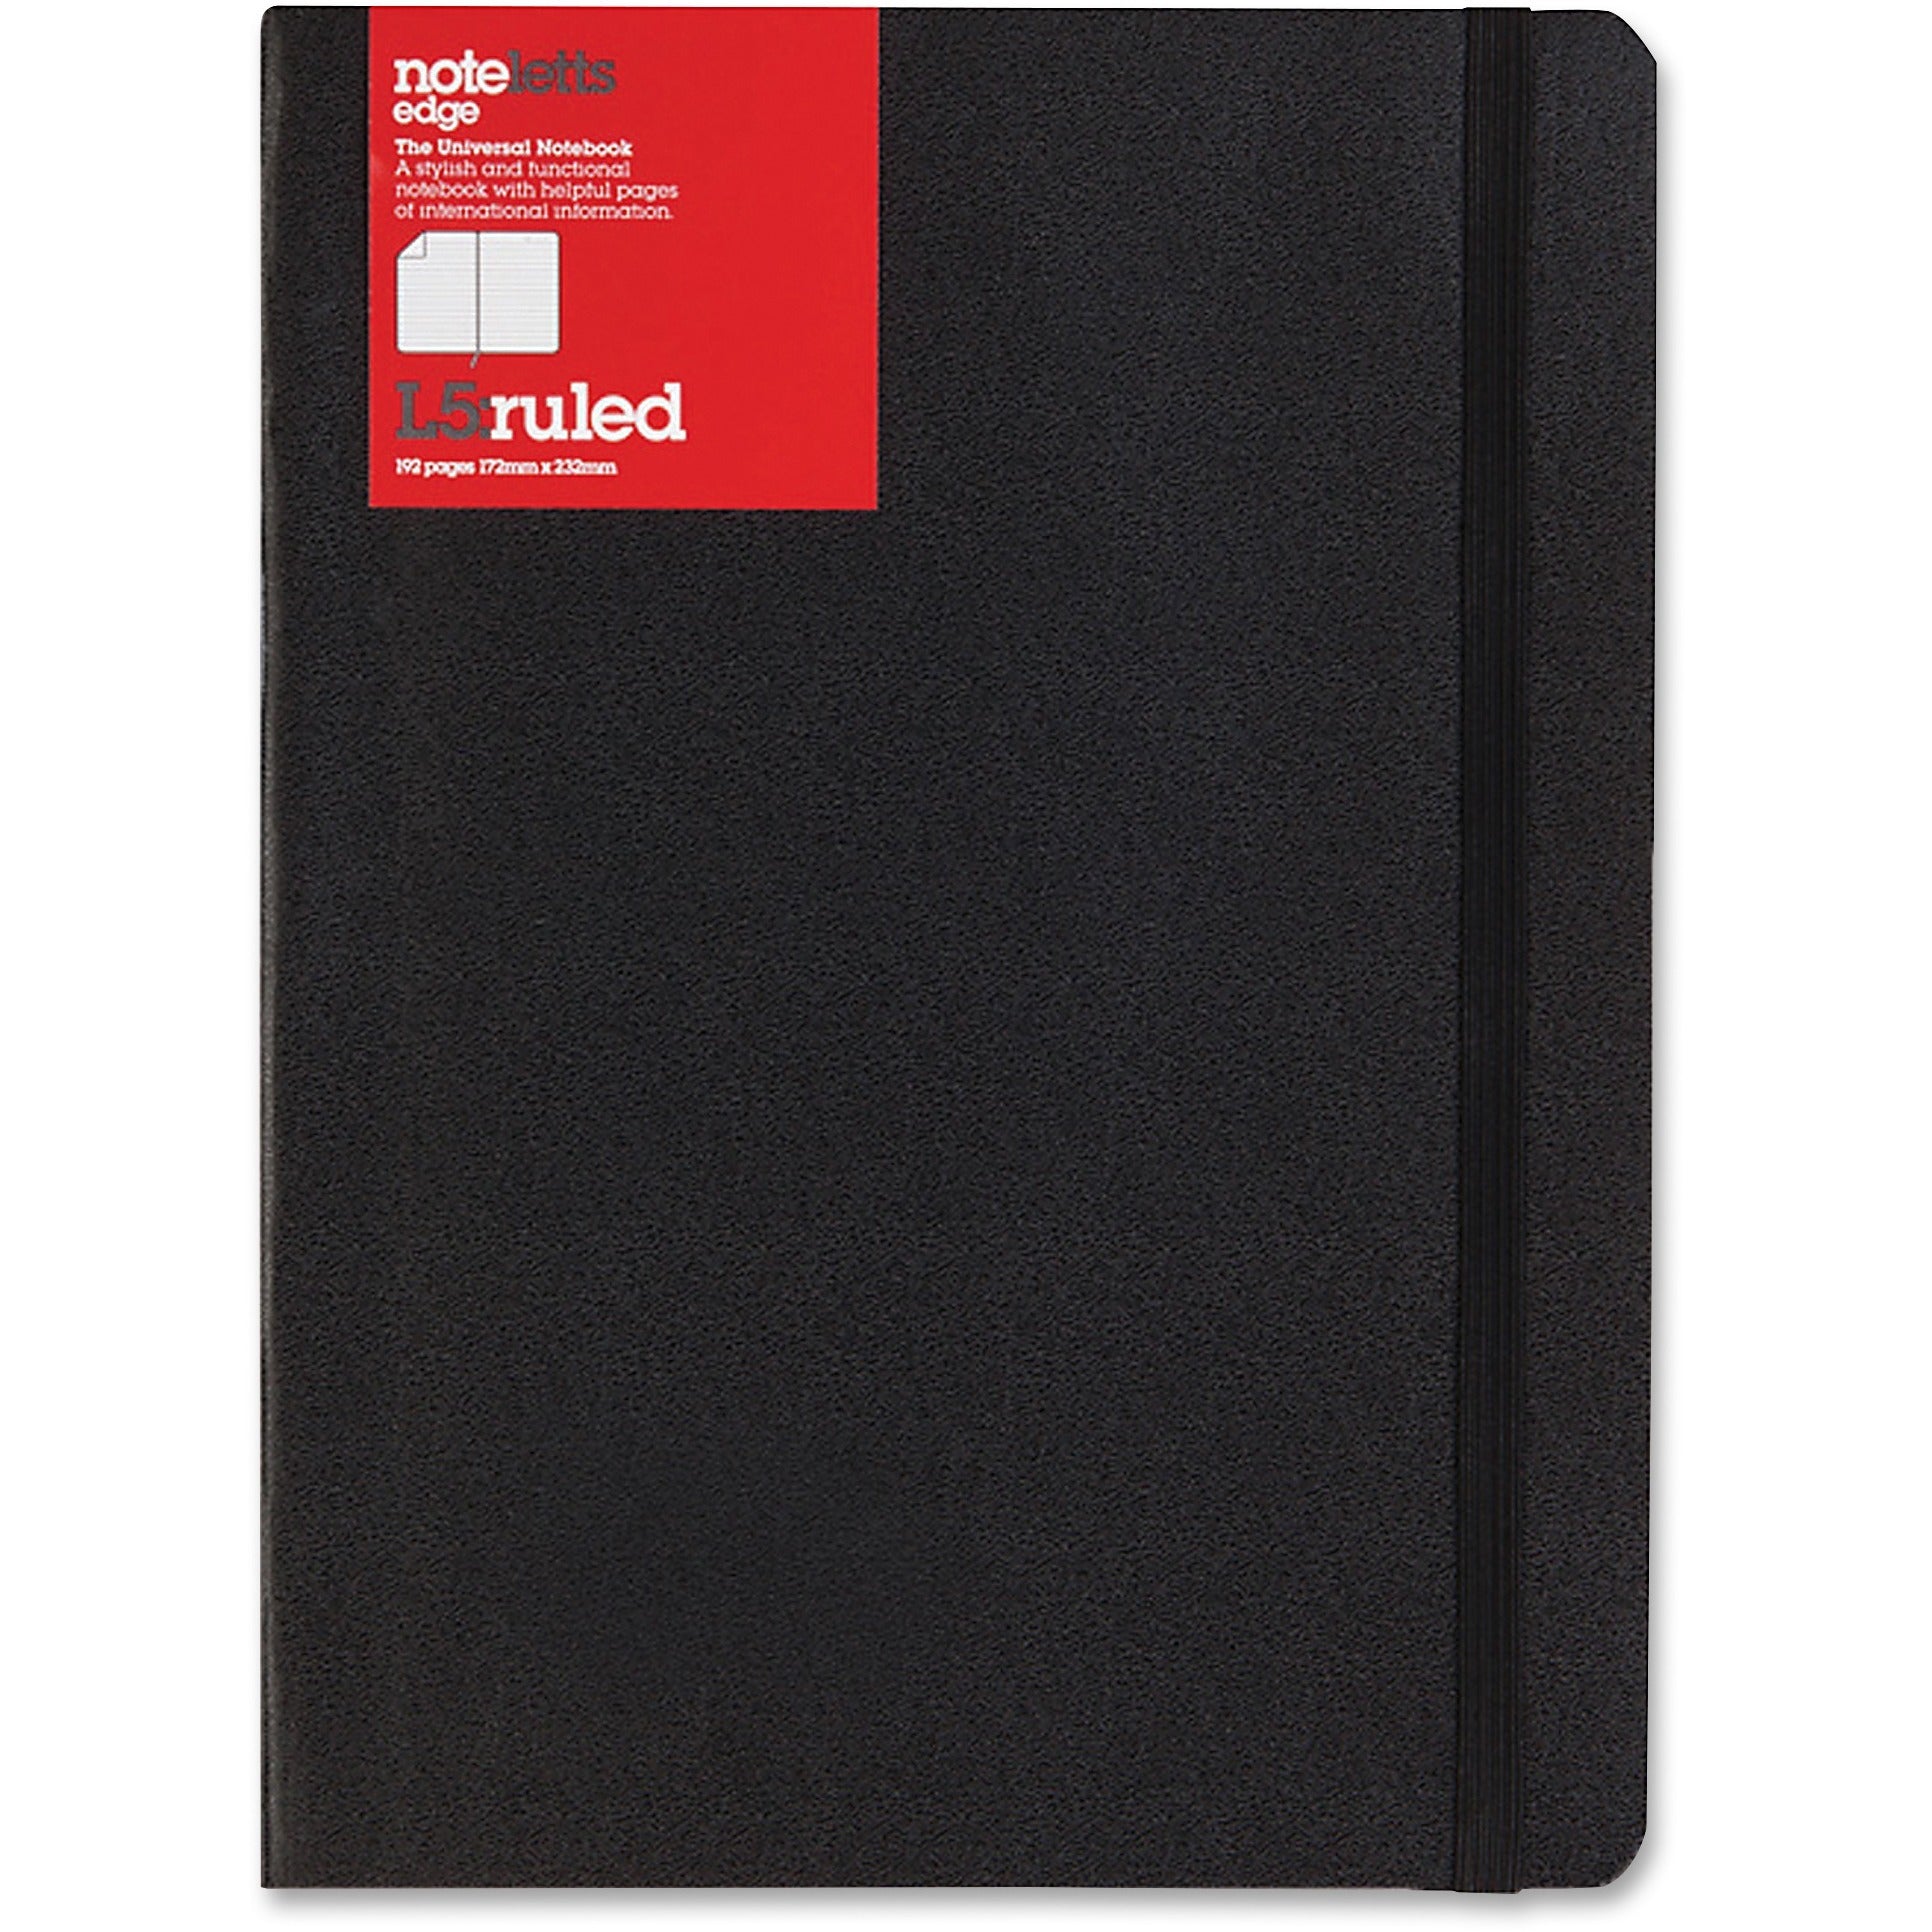 Letts of London L5 Ruled Notebook - Sewn9" x 6" - Black Cover - Elastic Closure, Flexible Cover, Pocket - 1 Each - 